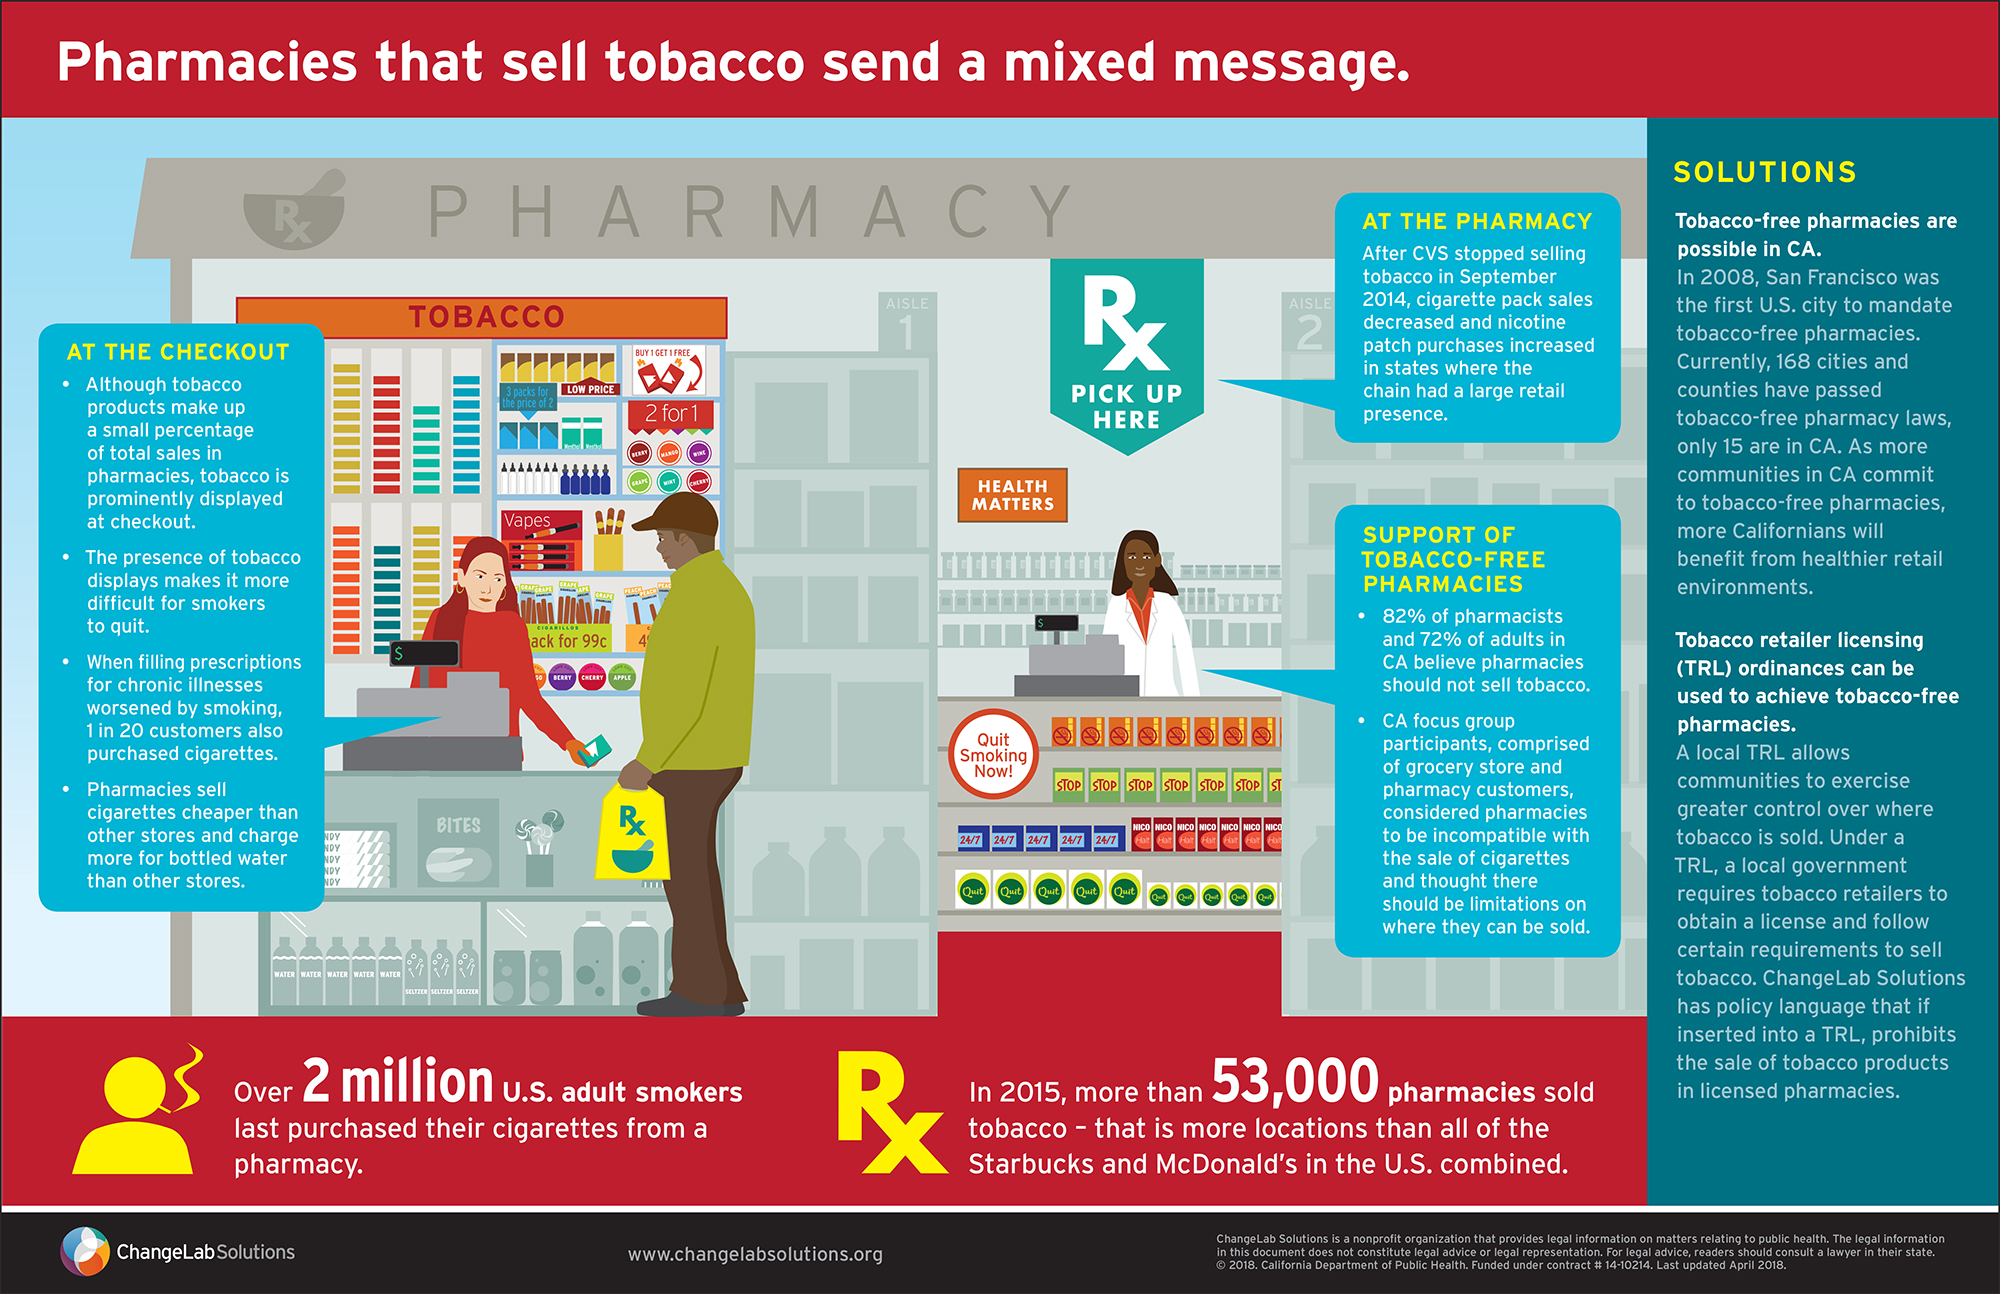 Infographic text: Pharmacies that sell tobacco send a mixed message. AT THE CHECKOUT: Although tobacco products make up a small percentage of total sales in pharmacies, tobacco is prominently displayed at checkout. The precense of tobacco displays makes it more difficult for smokers to quit. When filling prescriptions for chronic illnesses worsened by smoking. 1 in 20 customers also purchased cigarettes. Pharmacies sell cigarettes cheaper than other stores and charge more for bottled water than other stores. AT THE PHARMACY: After CVS stopped selling tobacco in September 2014, cigarette pack sales decreased and nicotine patch purchases increased in states where the chain had a large retail pretense. SUPPORT OF TOBACCO-FREE PHARMACIES: 82% of pharmacists and 72% of adults in CA believe pharmacies should not sell tobacco. CA focus group participants, comprised of grocery store and pharmacy customers, considered pharmacies to be incompatible with the sale of cigarettes and through there should be limitations on where they can be sold. SOLUTIONS: Tobacco-free pharmacies are possible in CA. In 2008, San Francisco was the first U.S. city to mandate tobacco-free pharmacies. Currently, 168 cities and counties have passed tobacco-free pharmacy laws, only 15 are in CA. As more communities in CA commit to tobacco-free pharmacies, more Californians will benefit from healthier retail environments. Tobacco retail licensing (TRL) ordinances can be used to achieve tobacco-free pharmacies. A local TRL allows communities to exercise greater control over where tobacco is sold. Under a TRL, a local government requires tobacco retailers to obtain a license and follow certain requirements to sell tobacco. ChangeLab Solutions has policy language that if inserted into a TRL prohibits the sale of tobacco products in licensed pharmacies. Over 2 million U.S. adults smokers last purchased their cigarettes form a pharmacy. In 2015, more than 53,000 pharmacies sold tobacco and that is more locations than all of the Starbucks and McDonalds in the U.S. combined. 